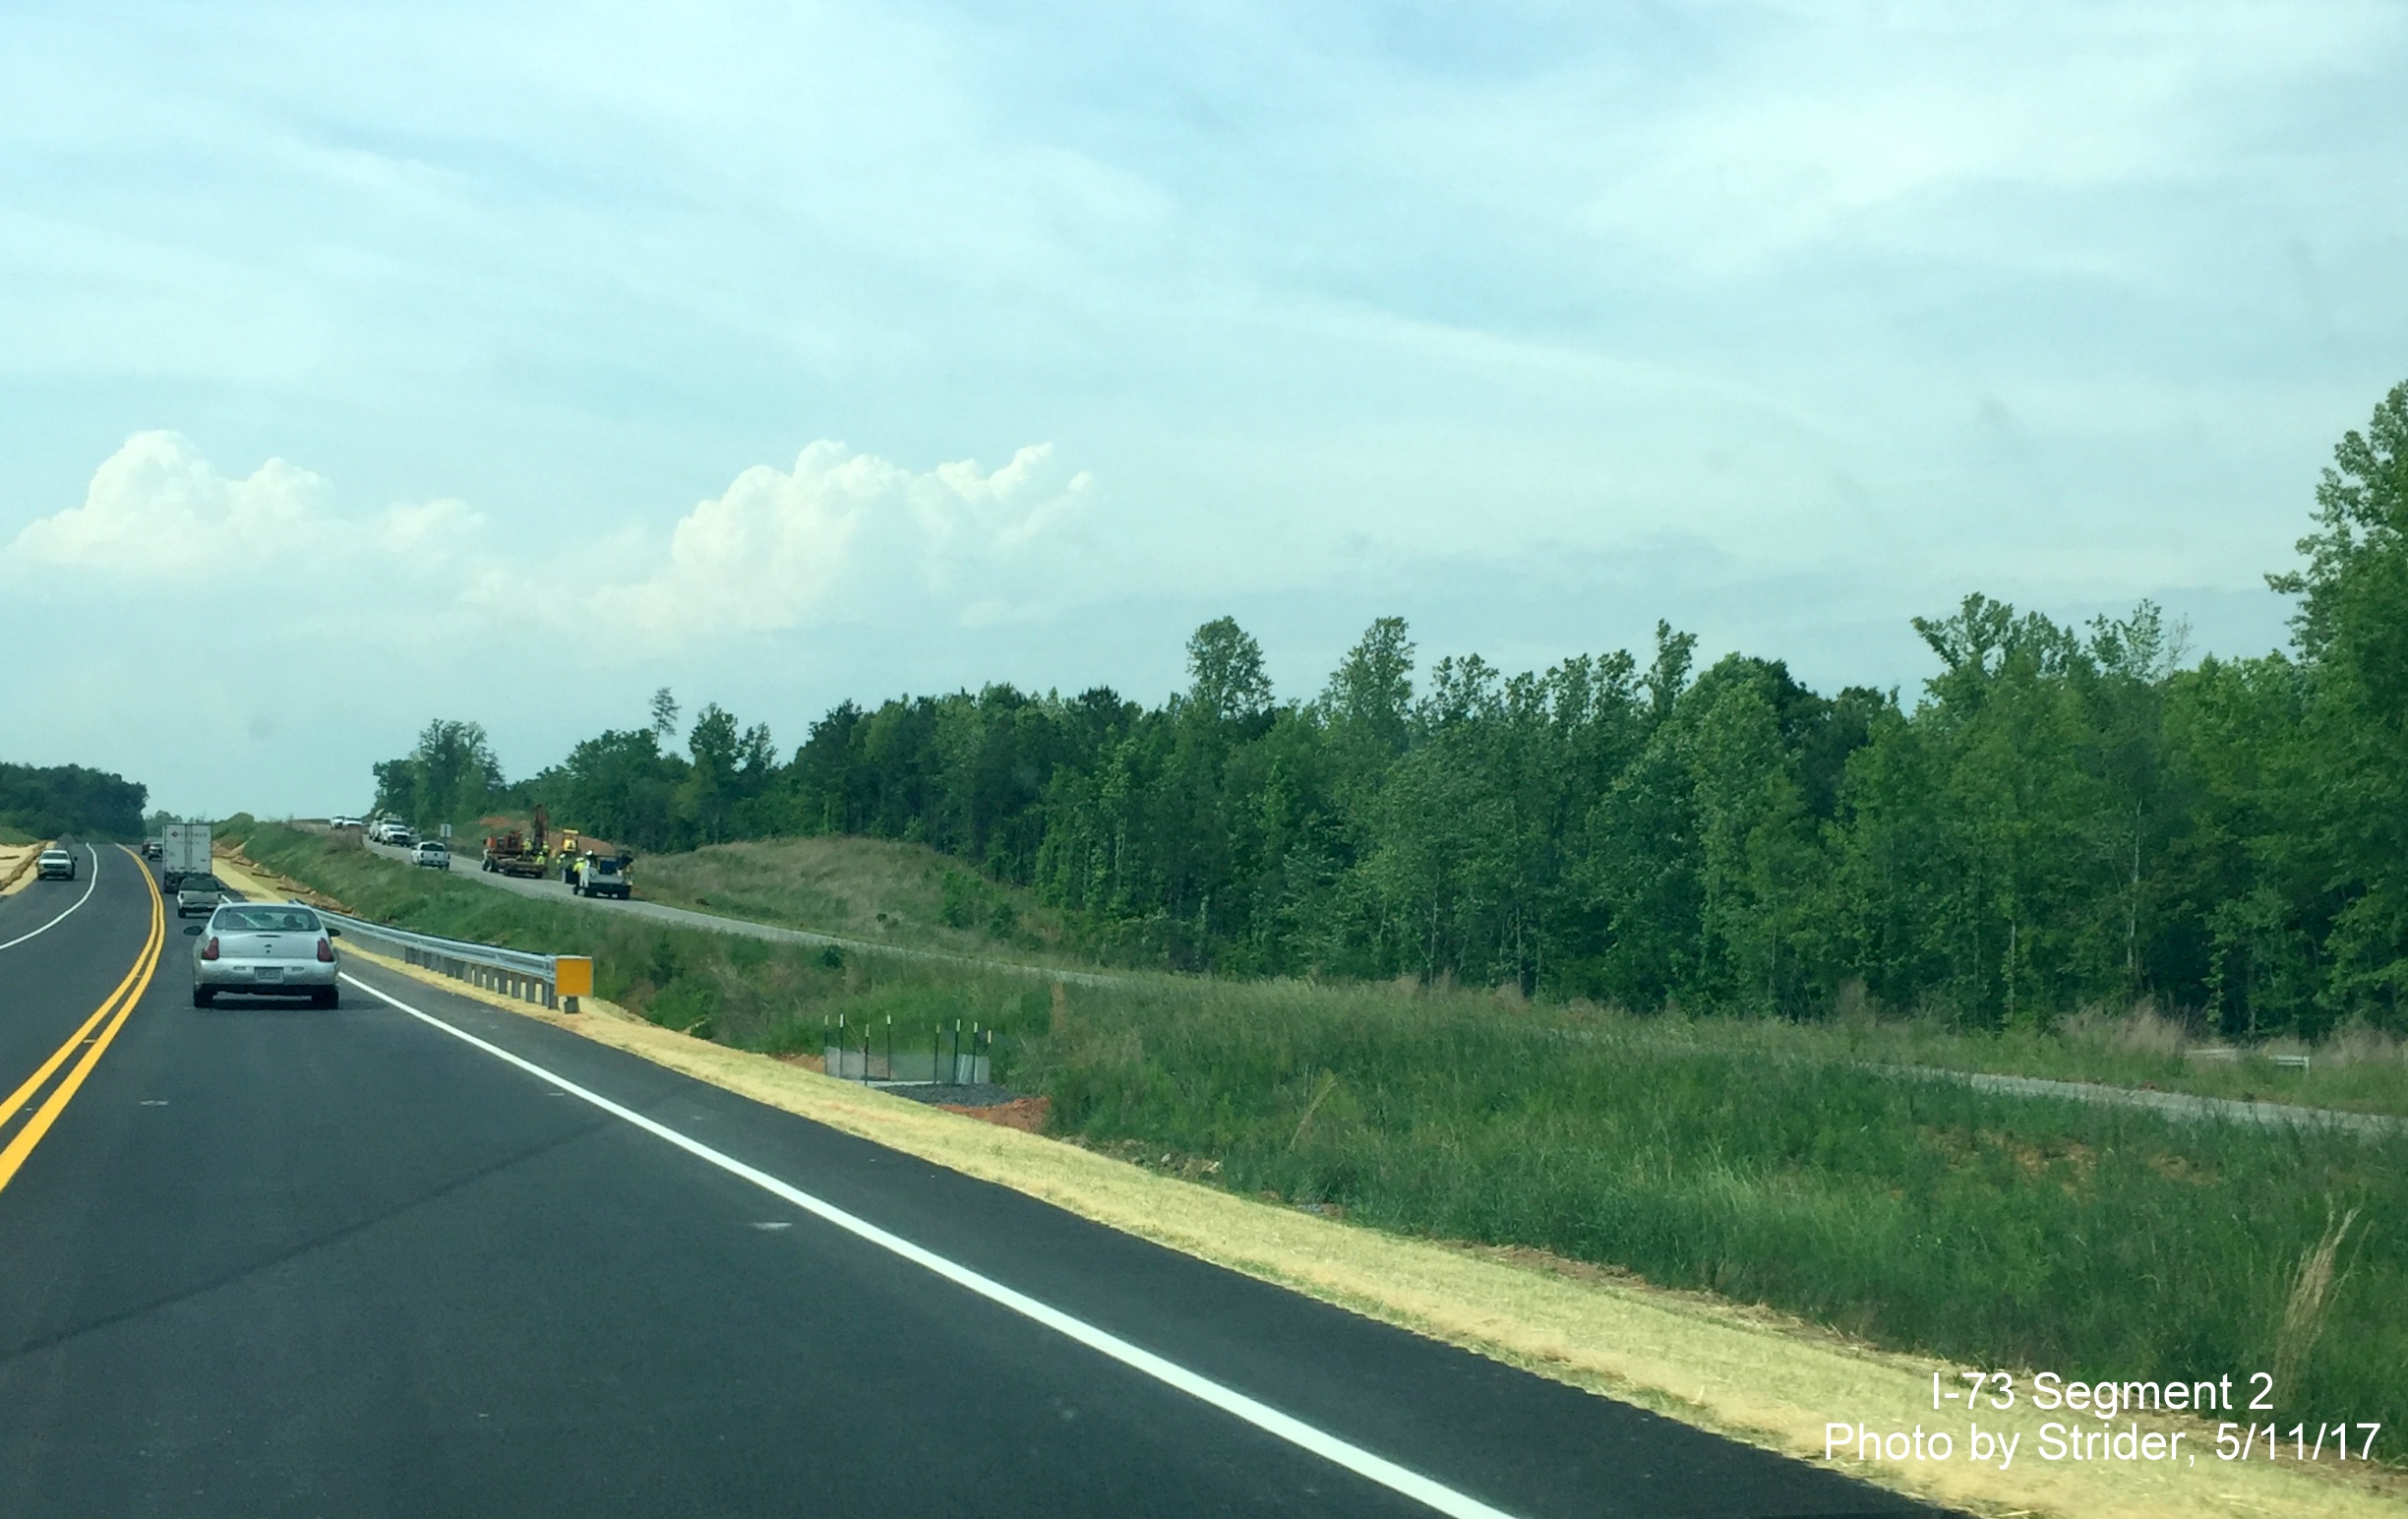 Image of construction of I-73 North from US 220 North using Future I-73 South lanes beyond NC 65, from Strider